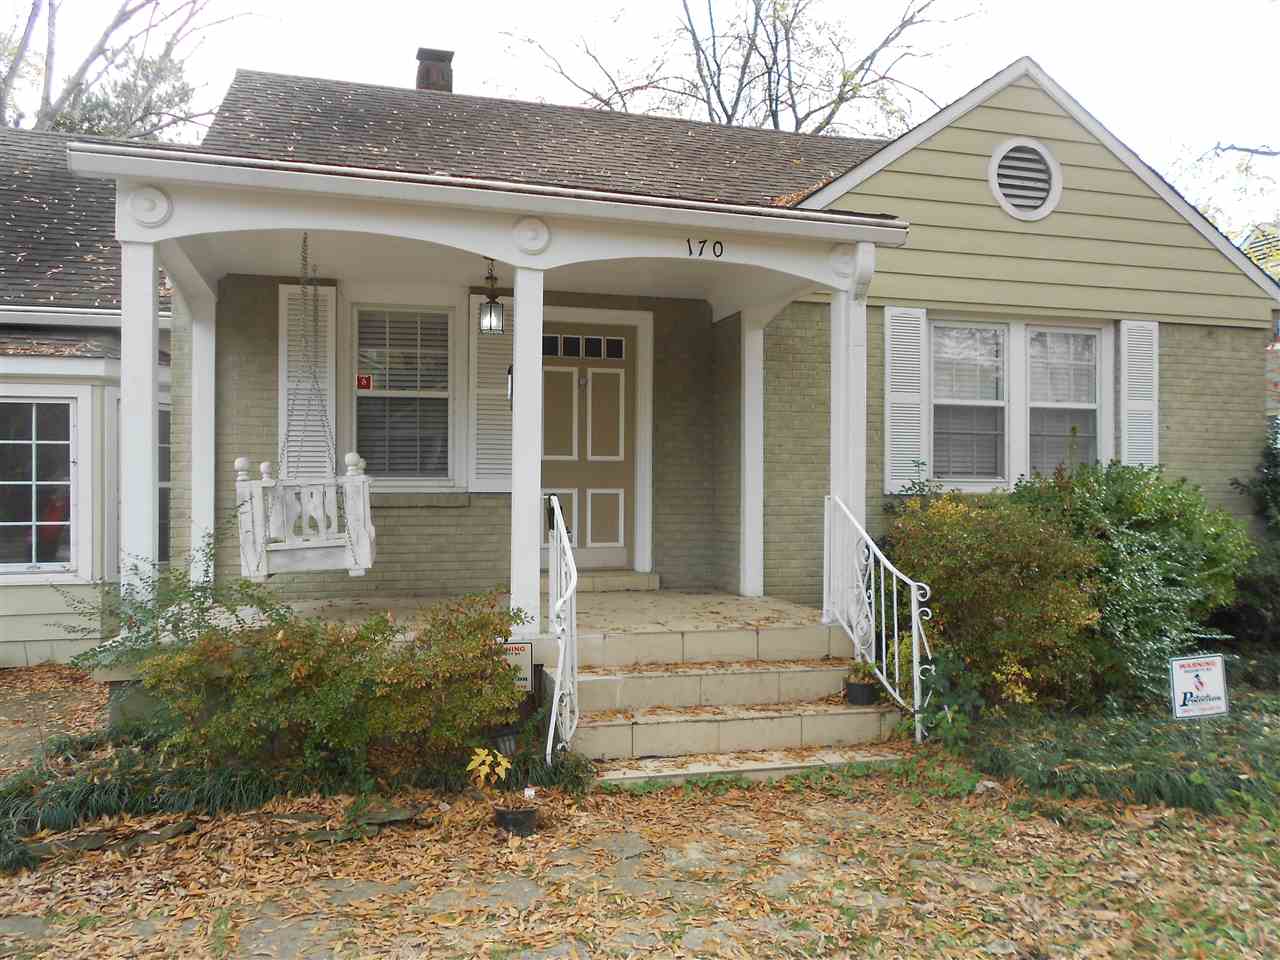 Welcome to 170 Alexander,come and sit a while on the sweet front porch, this home is located in the heart of Memphis most sought after neighborhood, convenient to the Poplar and Highland Shopping, Eating, and Entertainment area